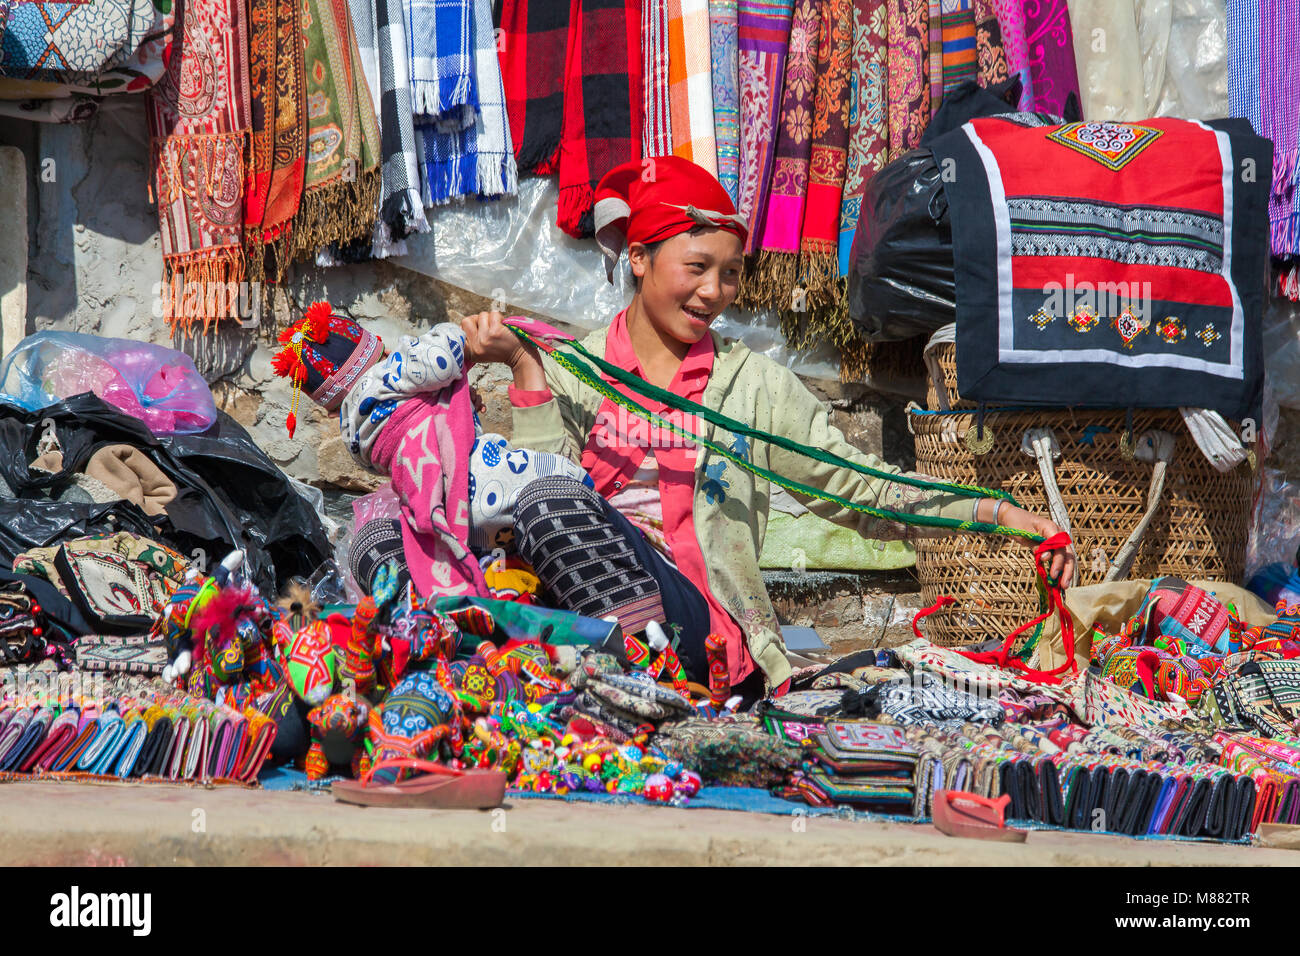 SA PA - DECEMBER 10, 2016: Street scene with Hmong and Dao people comming and selling goods at sunday market on december 10, 2016 in Sa Pa, Vietnam Stock Photo